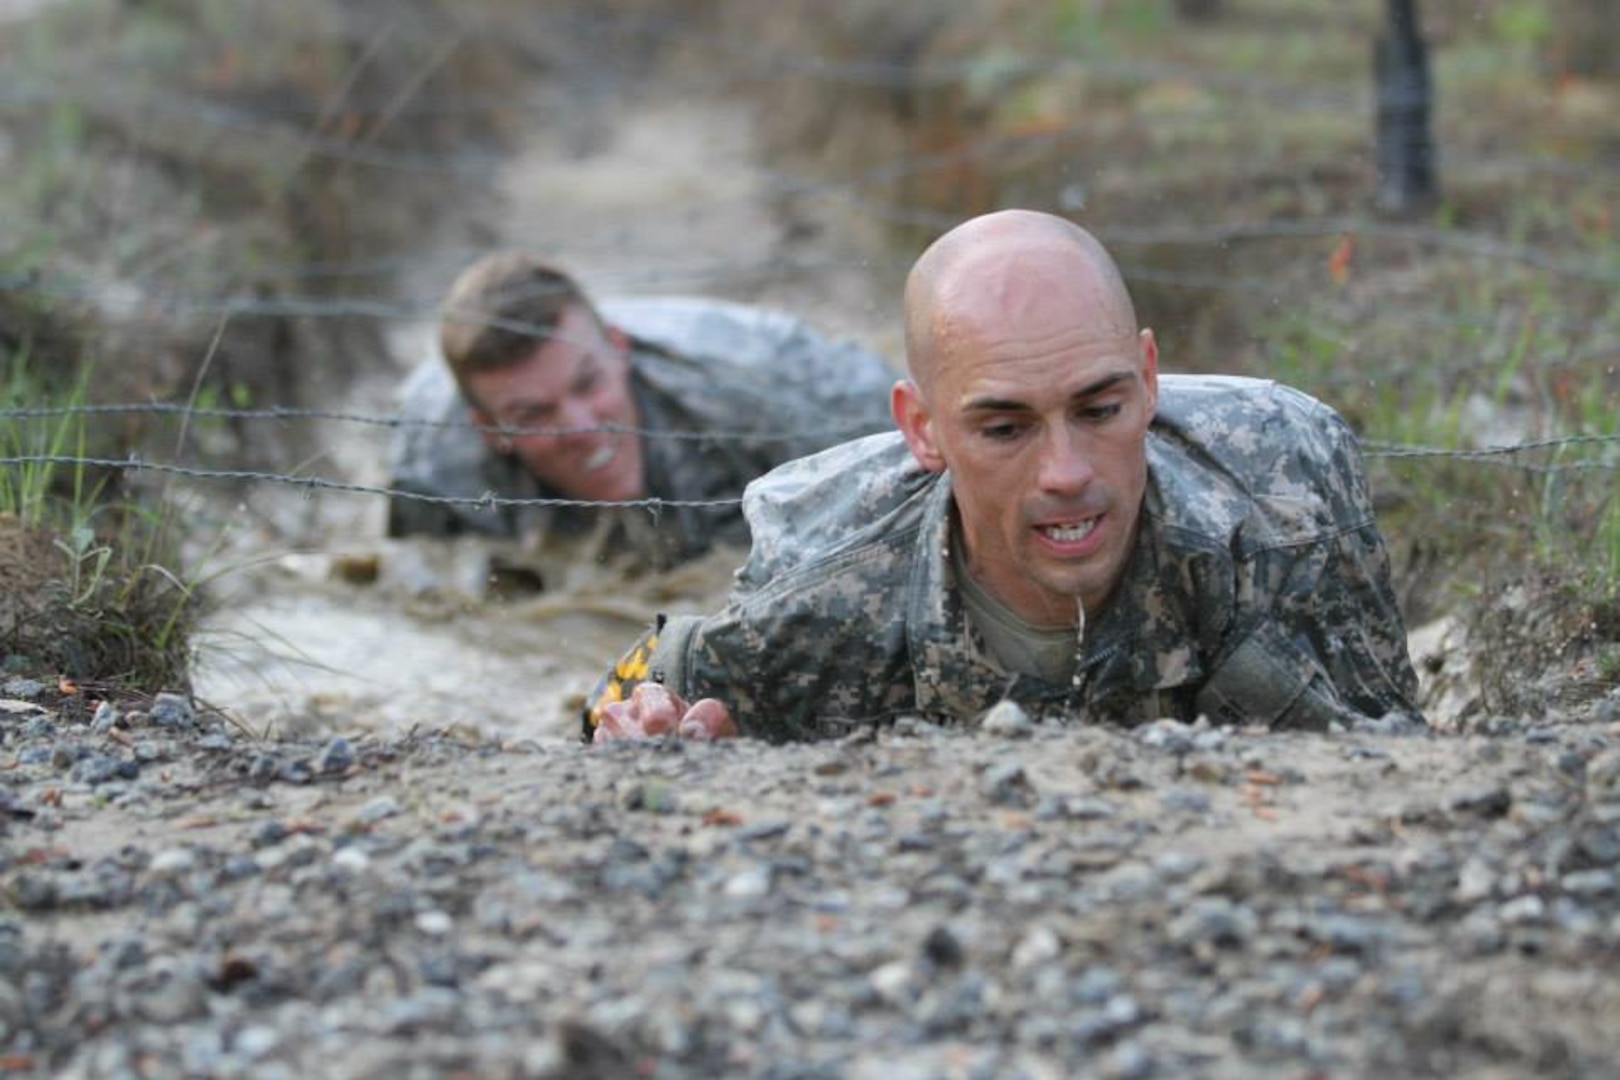 ​U.S. Soldiers Capt. Robert Killian, Colorado Army National Guard, and 1st Lt. Niclolas Plocar, Wisconsin Army National Guard, negotiate the Malvesti Field Obstacle Course during the 2014 Best Ranger competition at Fort Benning, Ga., April 11, 2014. (U.S. Army photo)